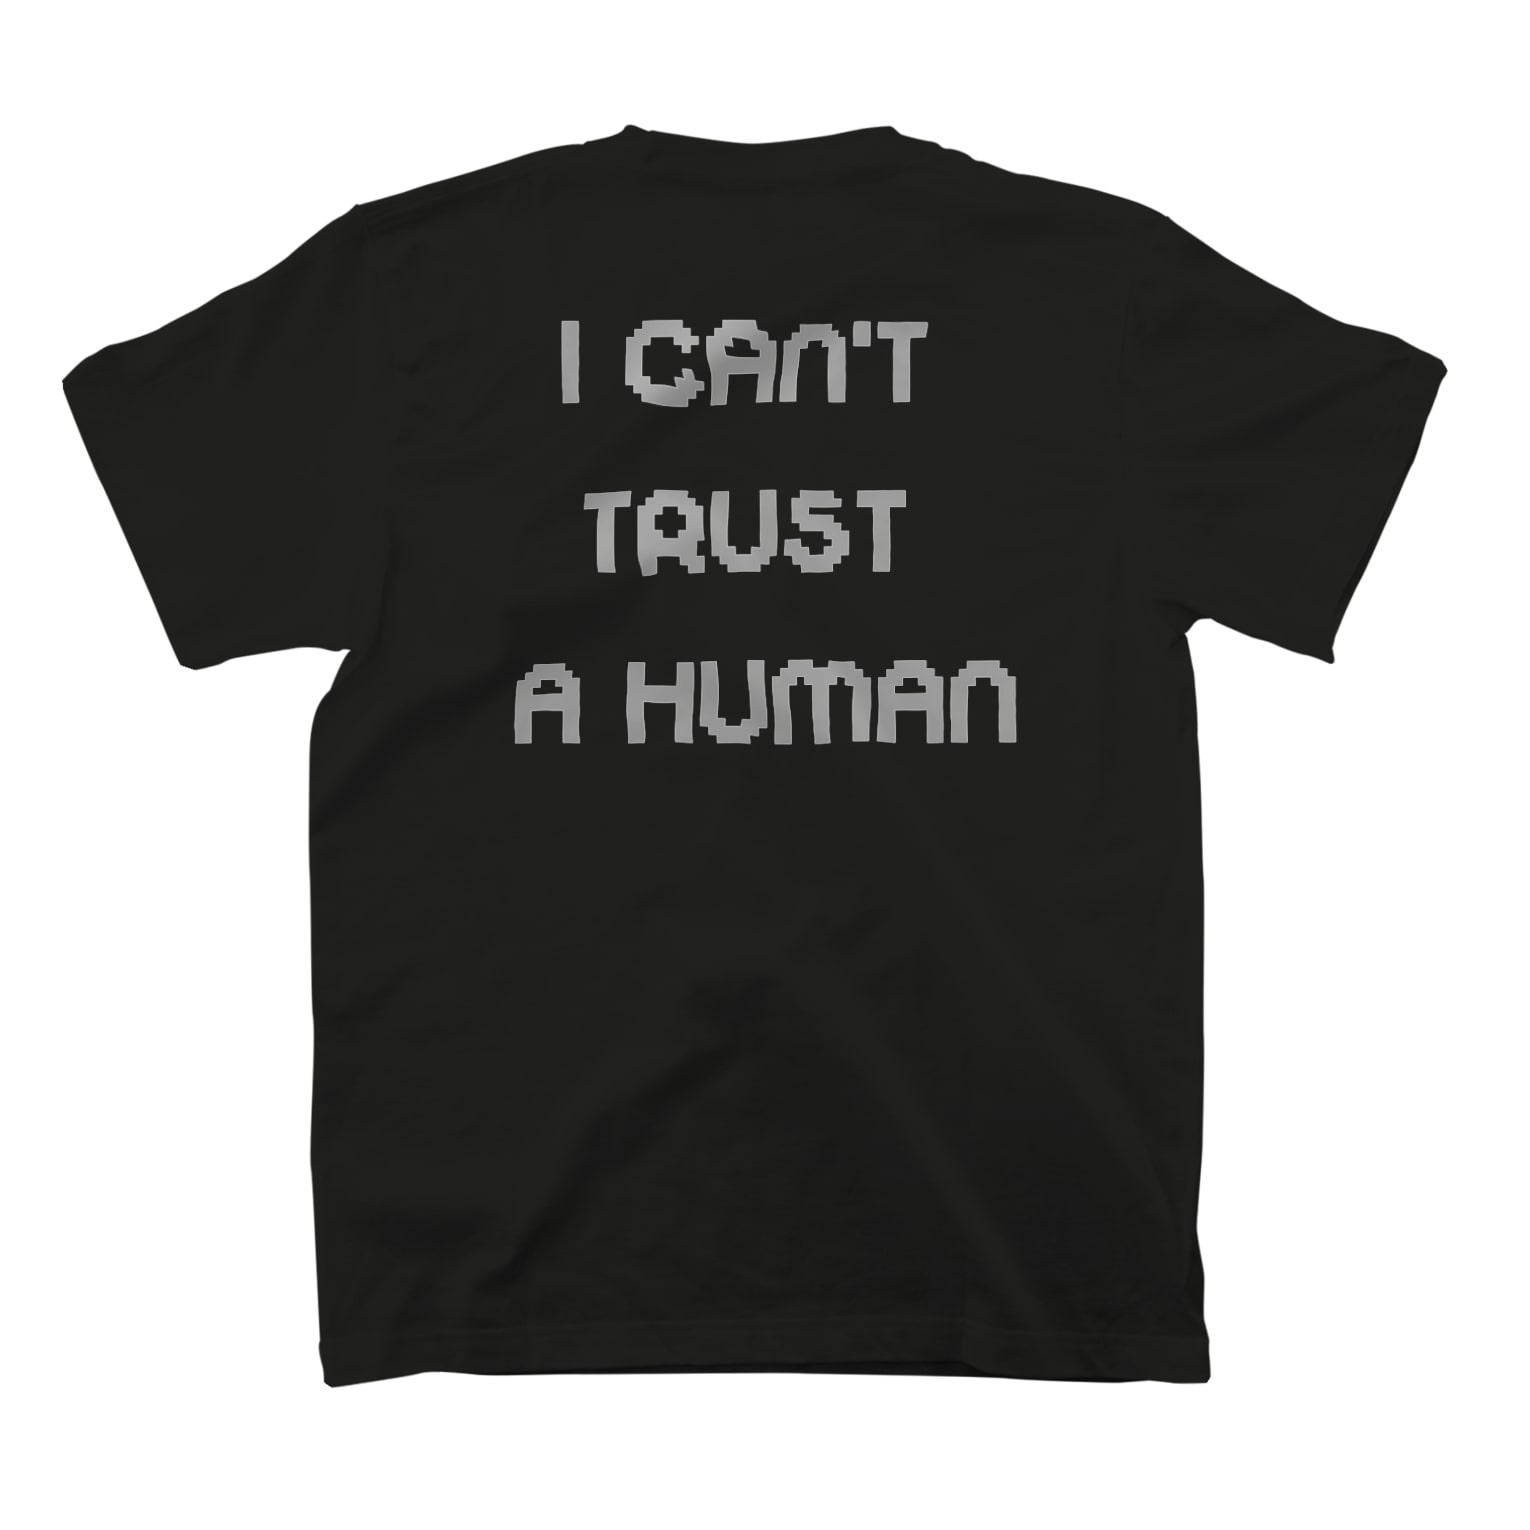 Grass Poet「I CAN'T TRUST A HUMAN」TEE